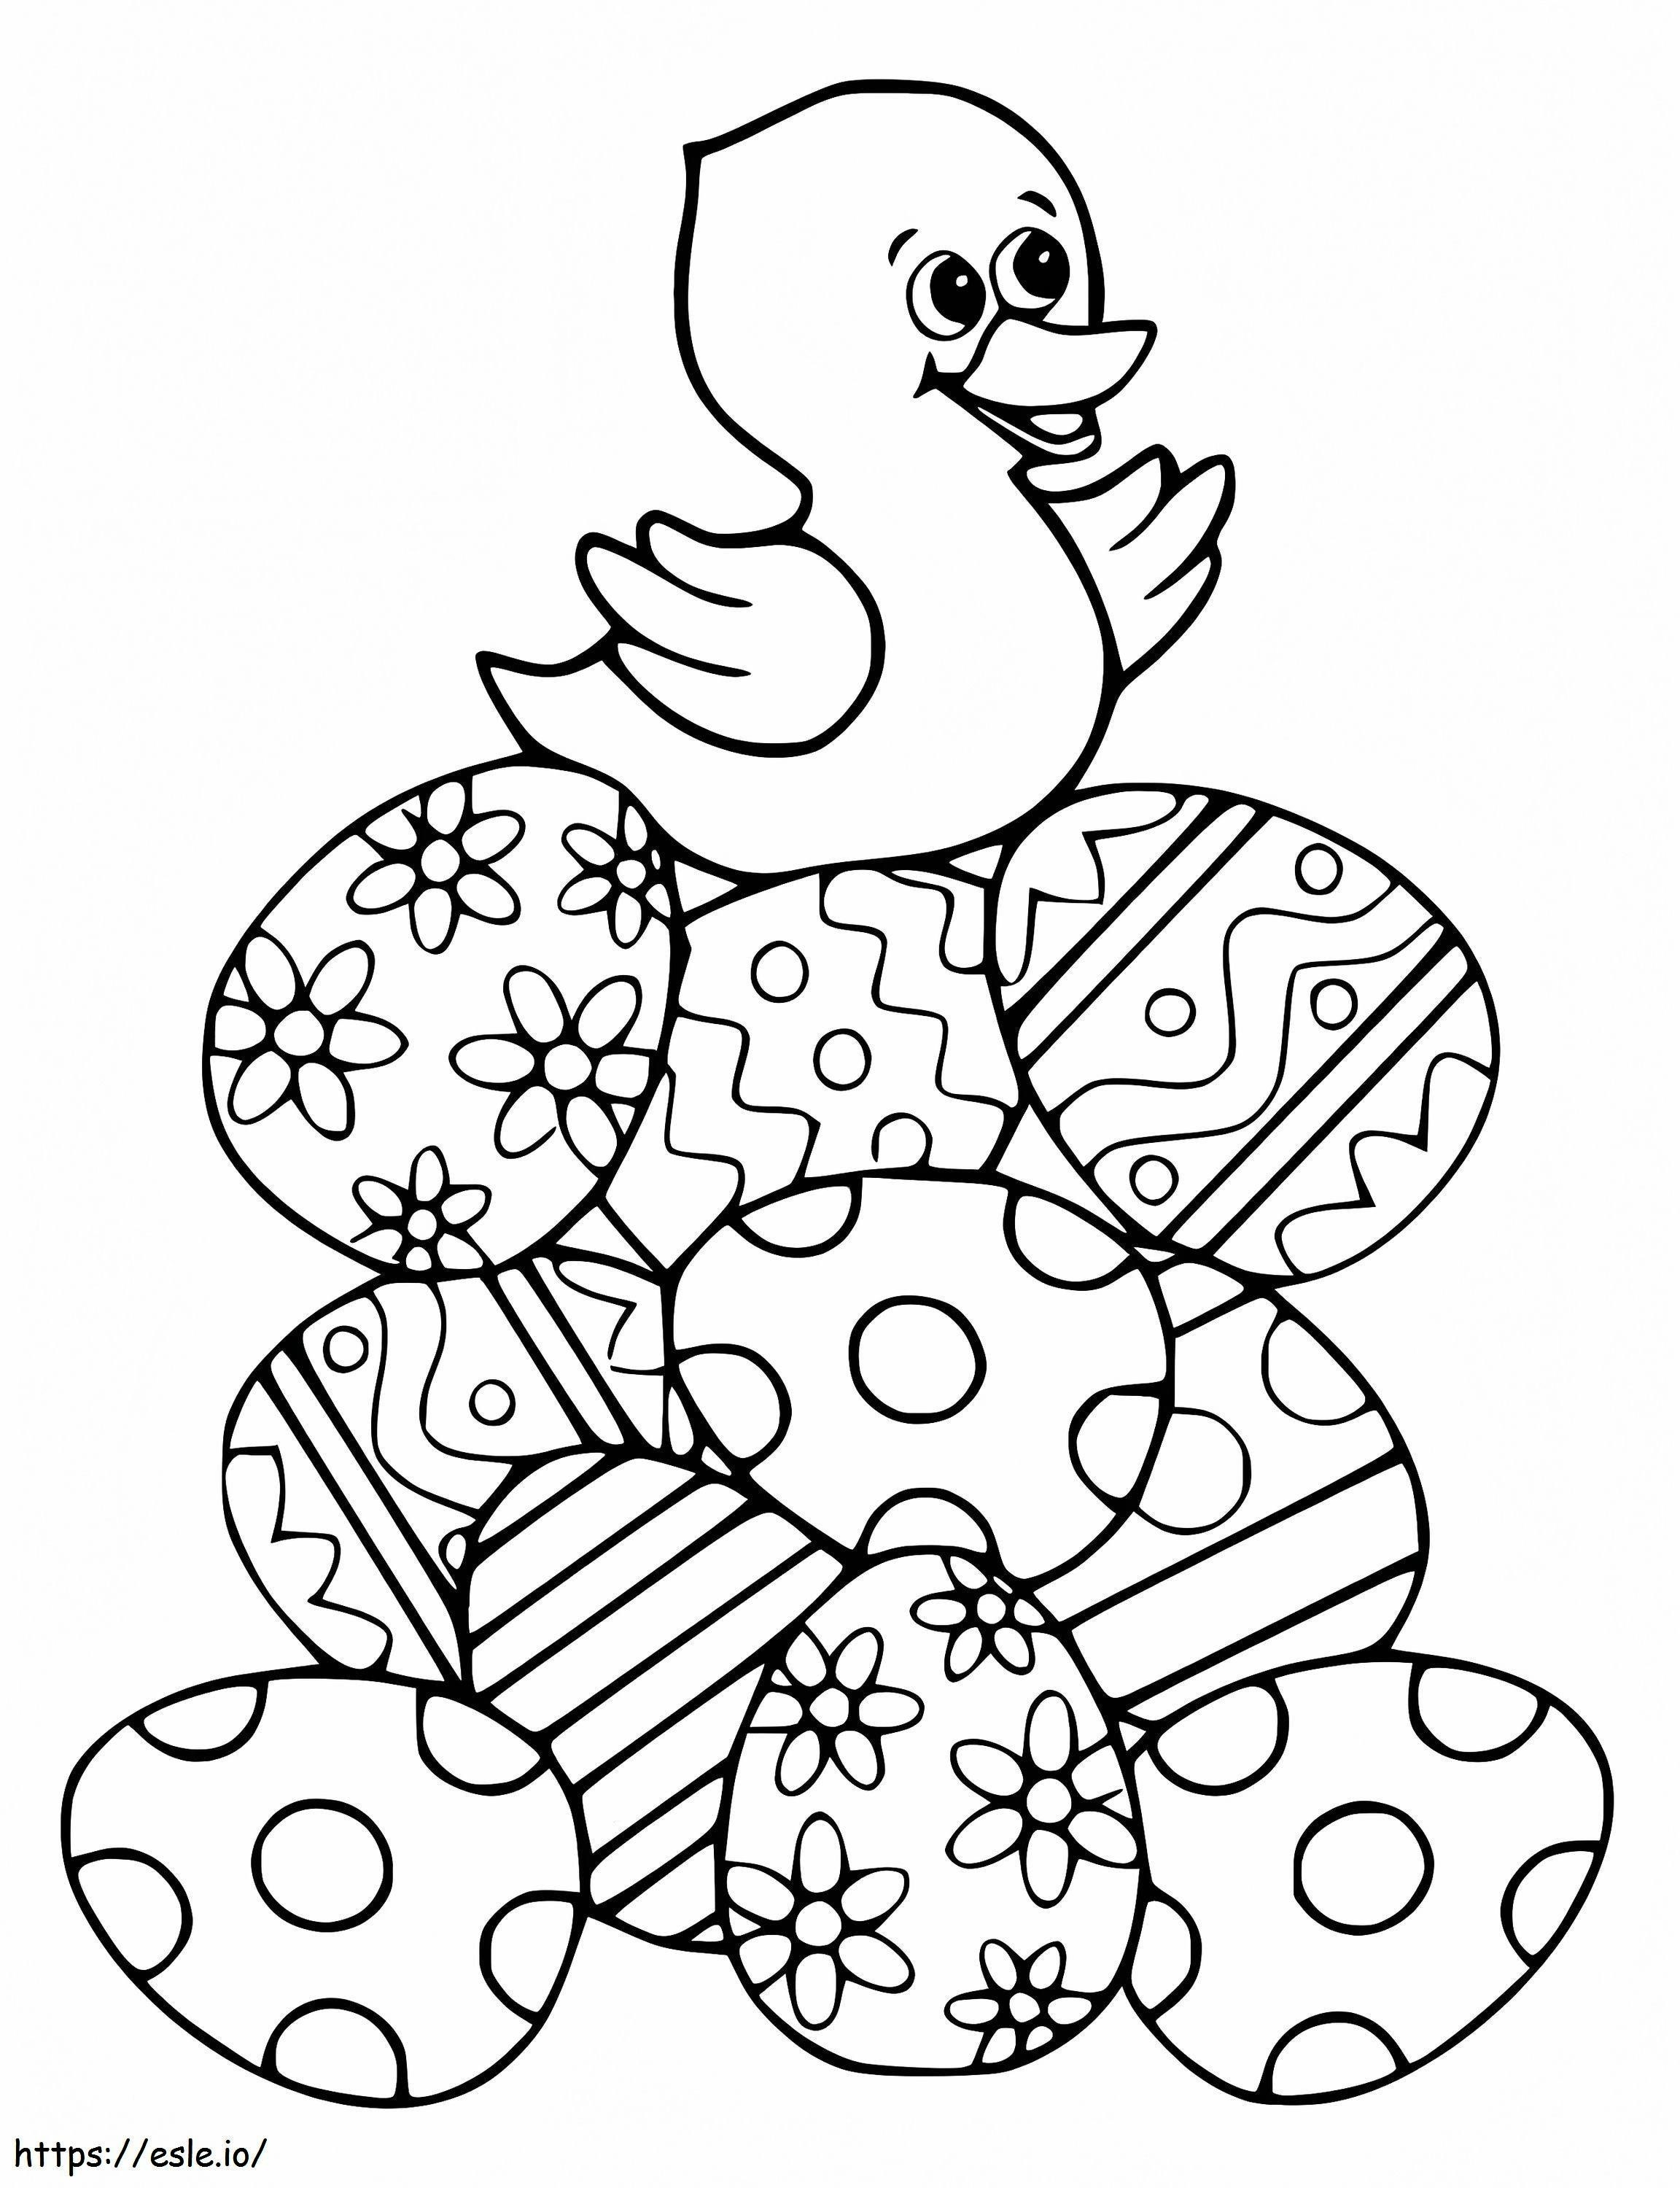 Easter Duckling coloring page